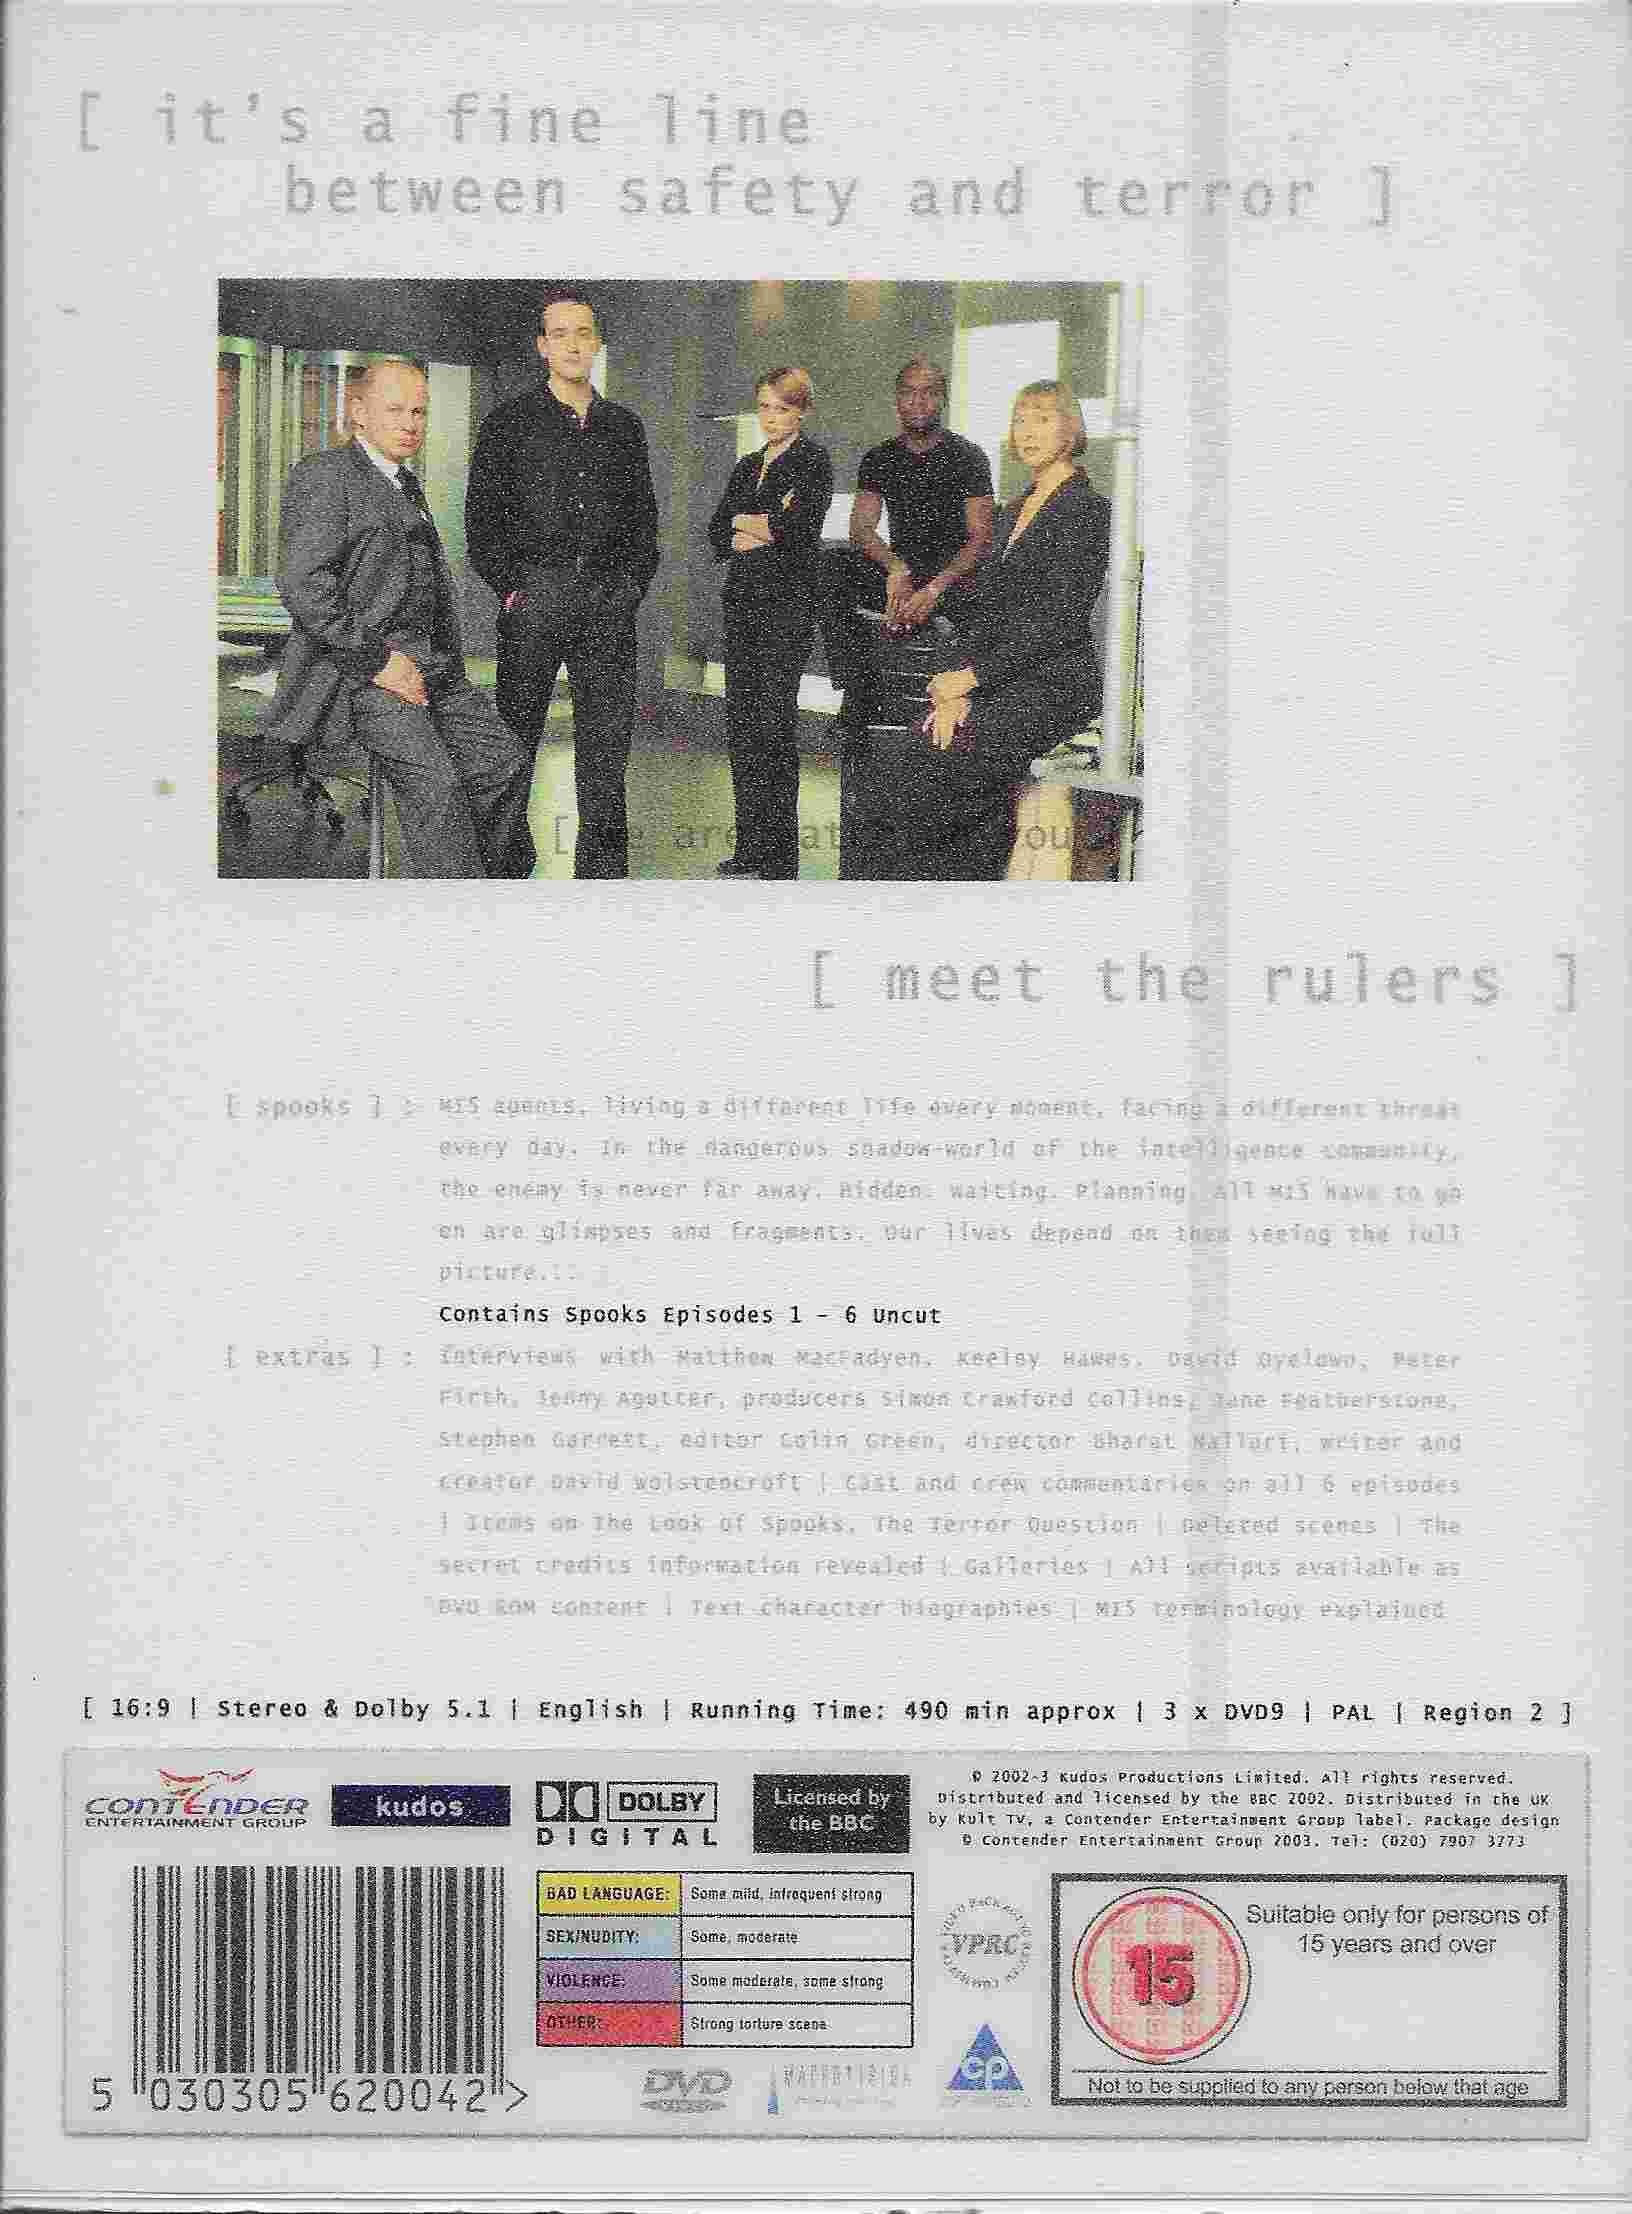 Picture of KLT 62004 [ spooks ] by artist David Wolstencroft / Simon Mirren / Howard Brenton from the BBC records and Tapes library